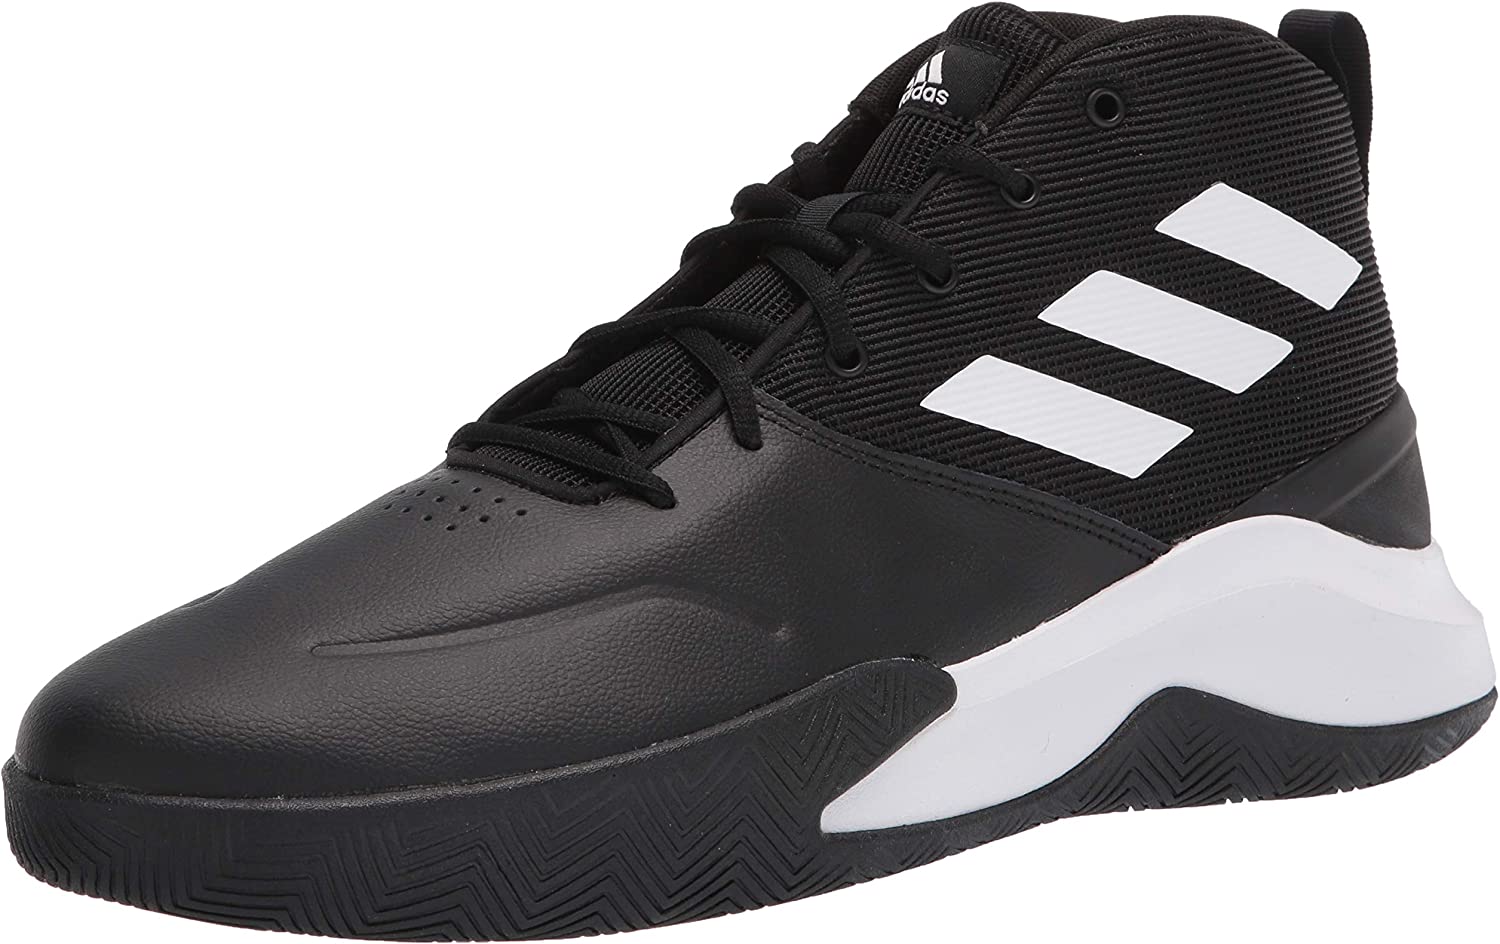 Are Adidas Basketball Shoes? - Shoe Effect